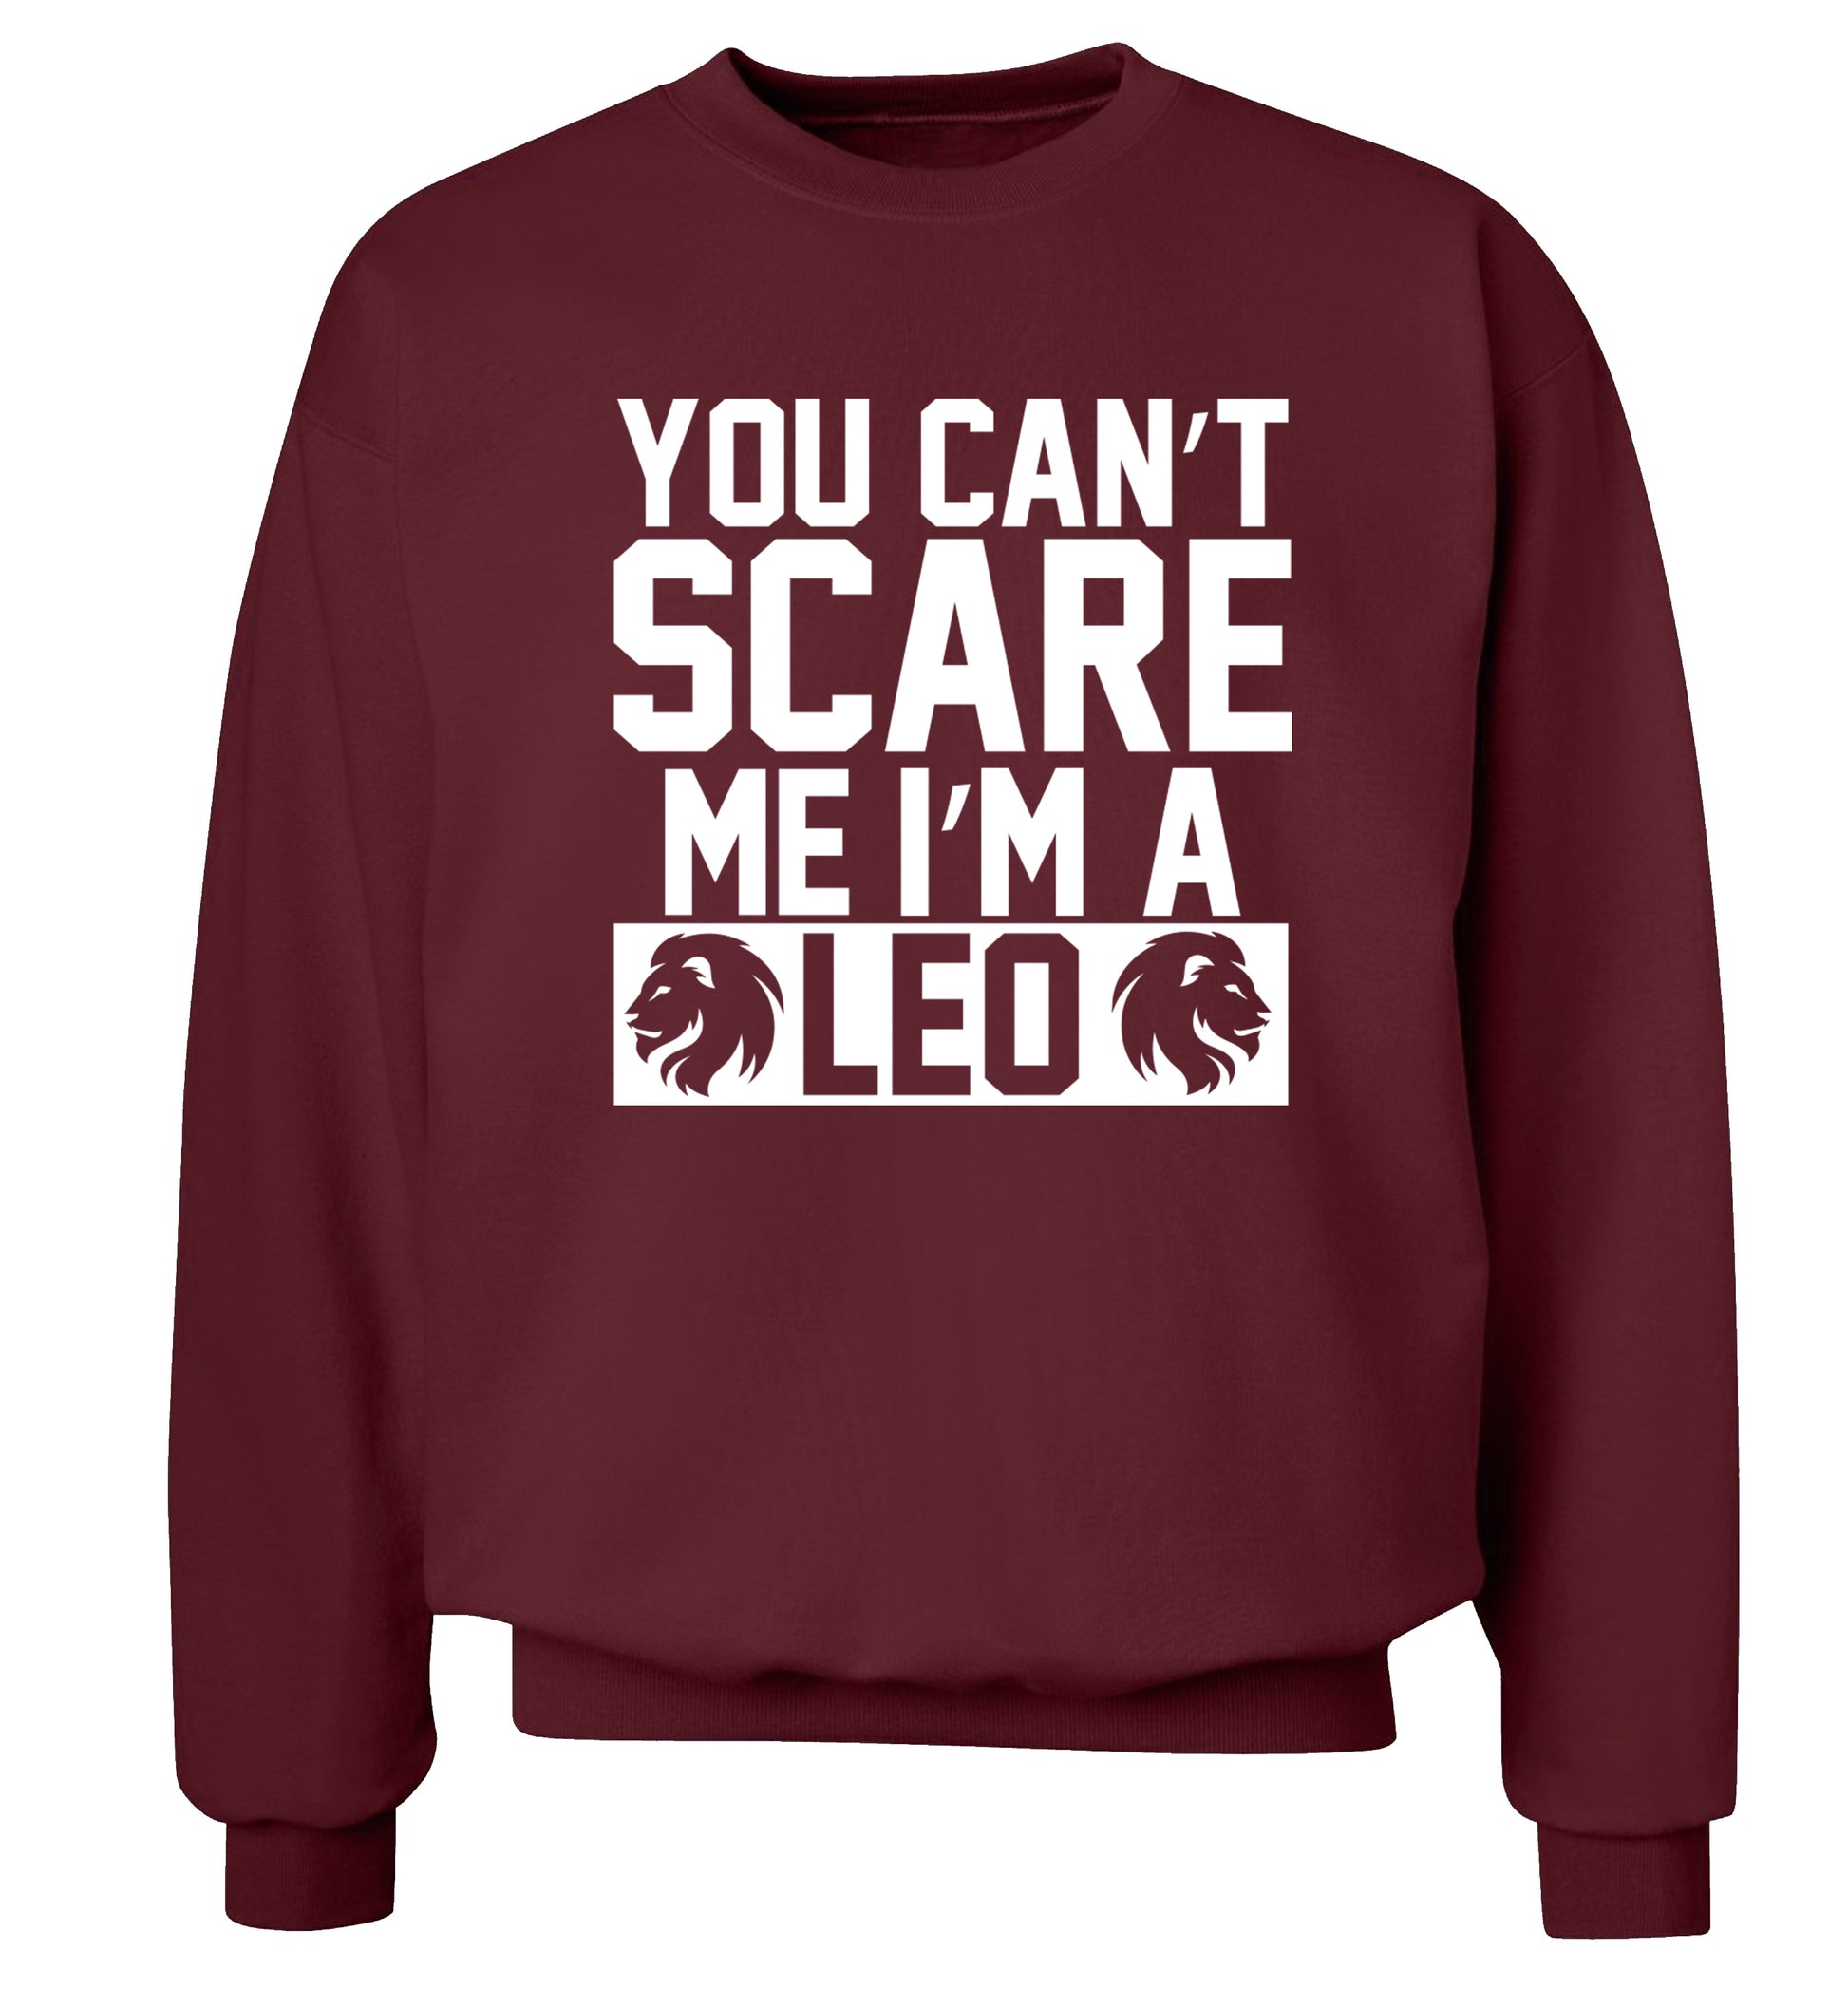 You can't scare me I'm a leo Adult's unisex maroon Sweater 2XL